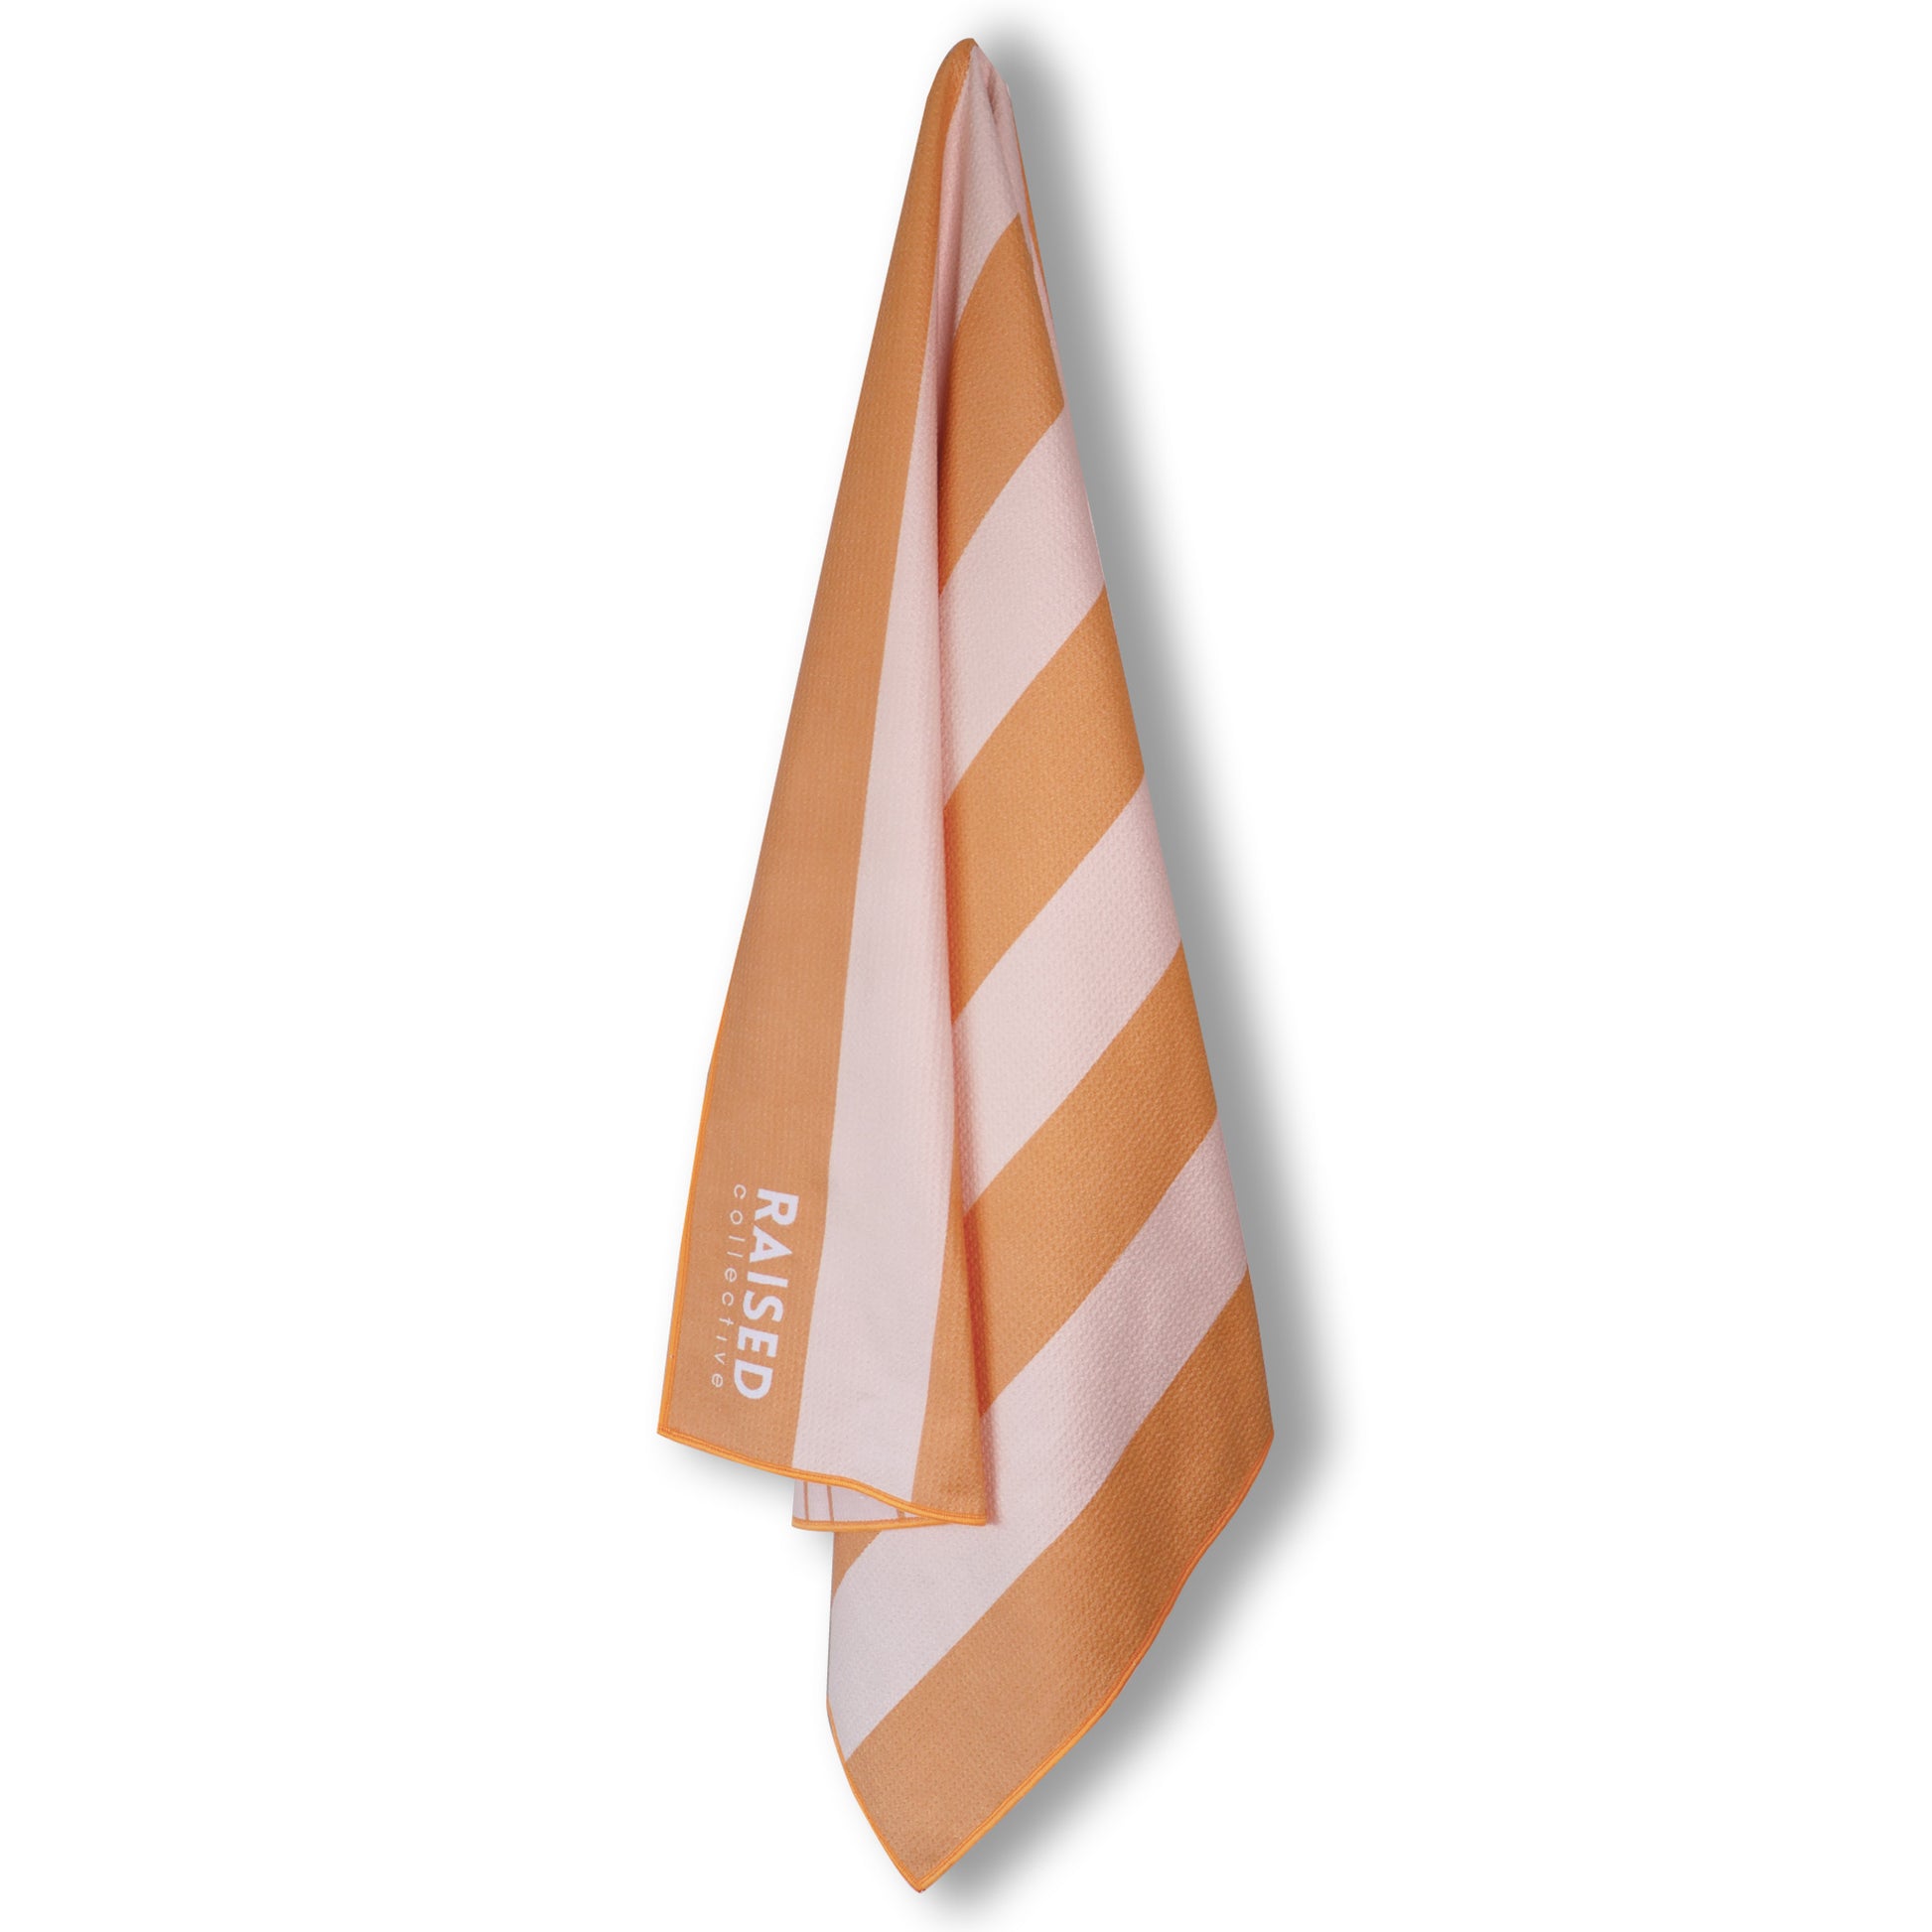 Amalfi sand free beach towel made from recycled materials, double sided design in an orange and pearl beige stripe.